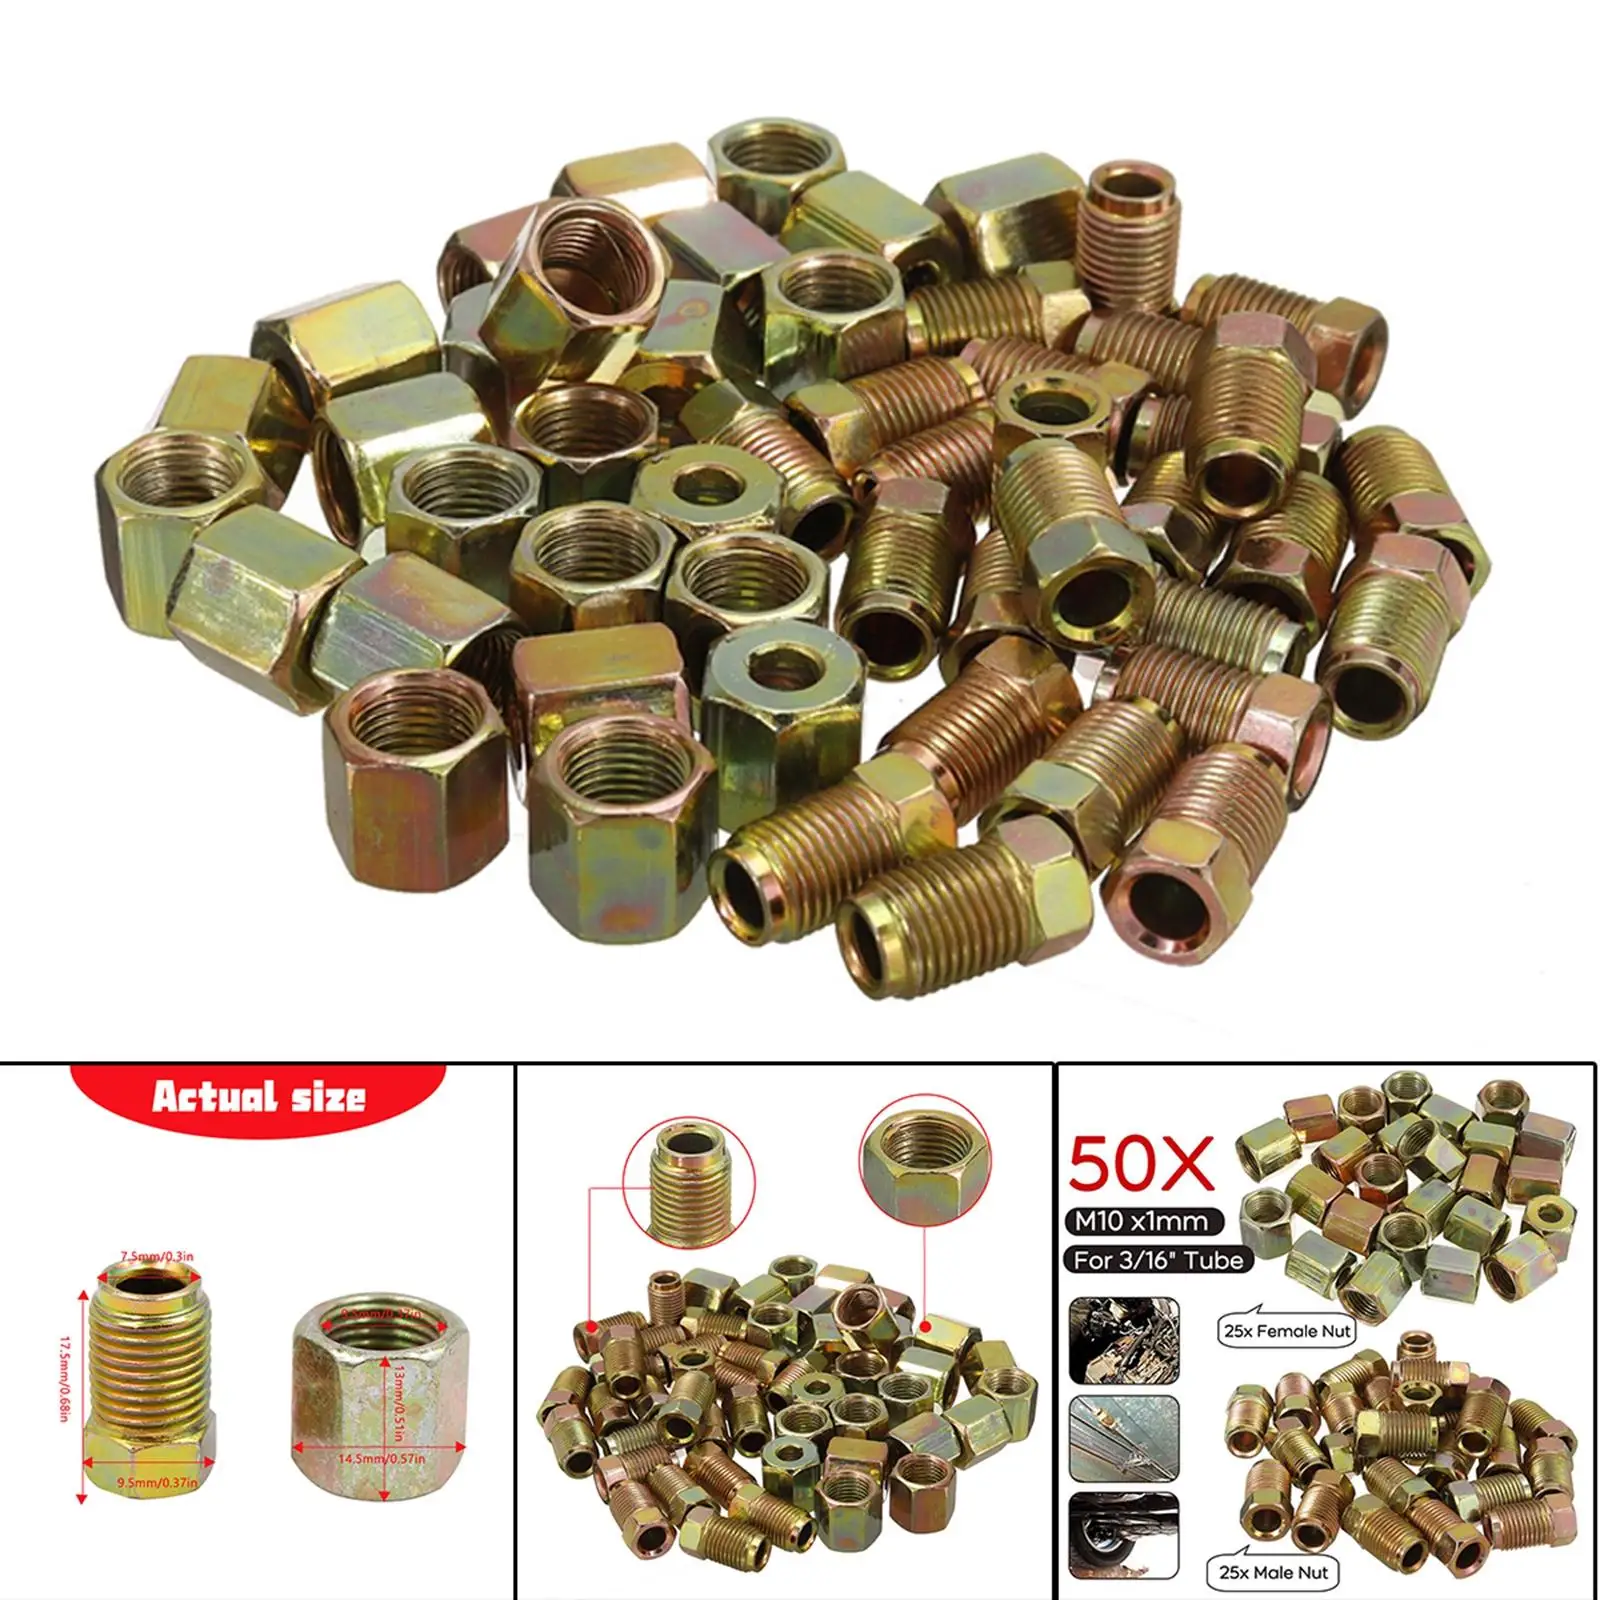 50Pcs Brake Pipe Fittings Adapter 10x1mm Male & Female Metric Nuts for 3/16 inch Brake Line Tube Replacement Accs